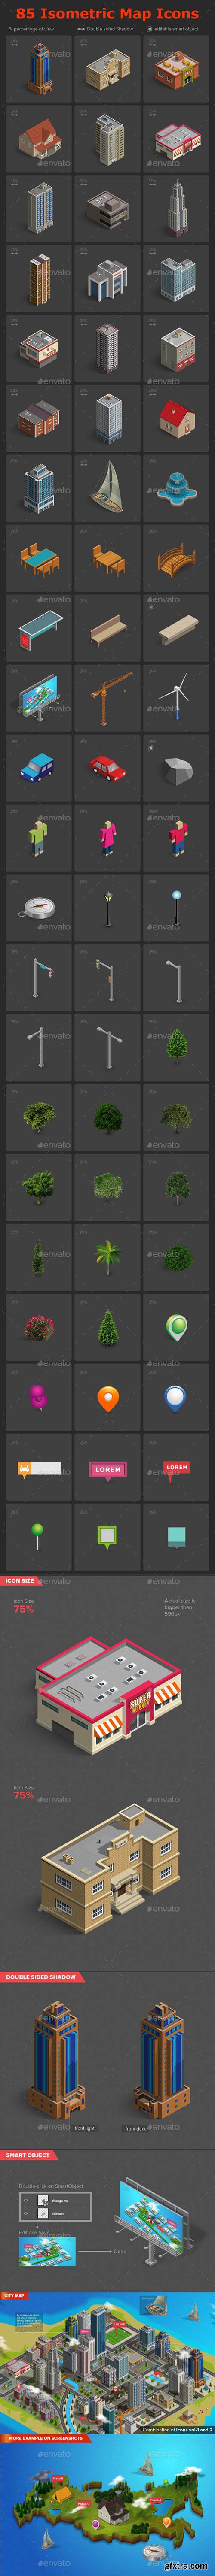 Graphicriver Isometric Map Icons Vol.02 17979944